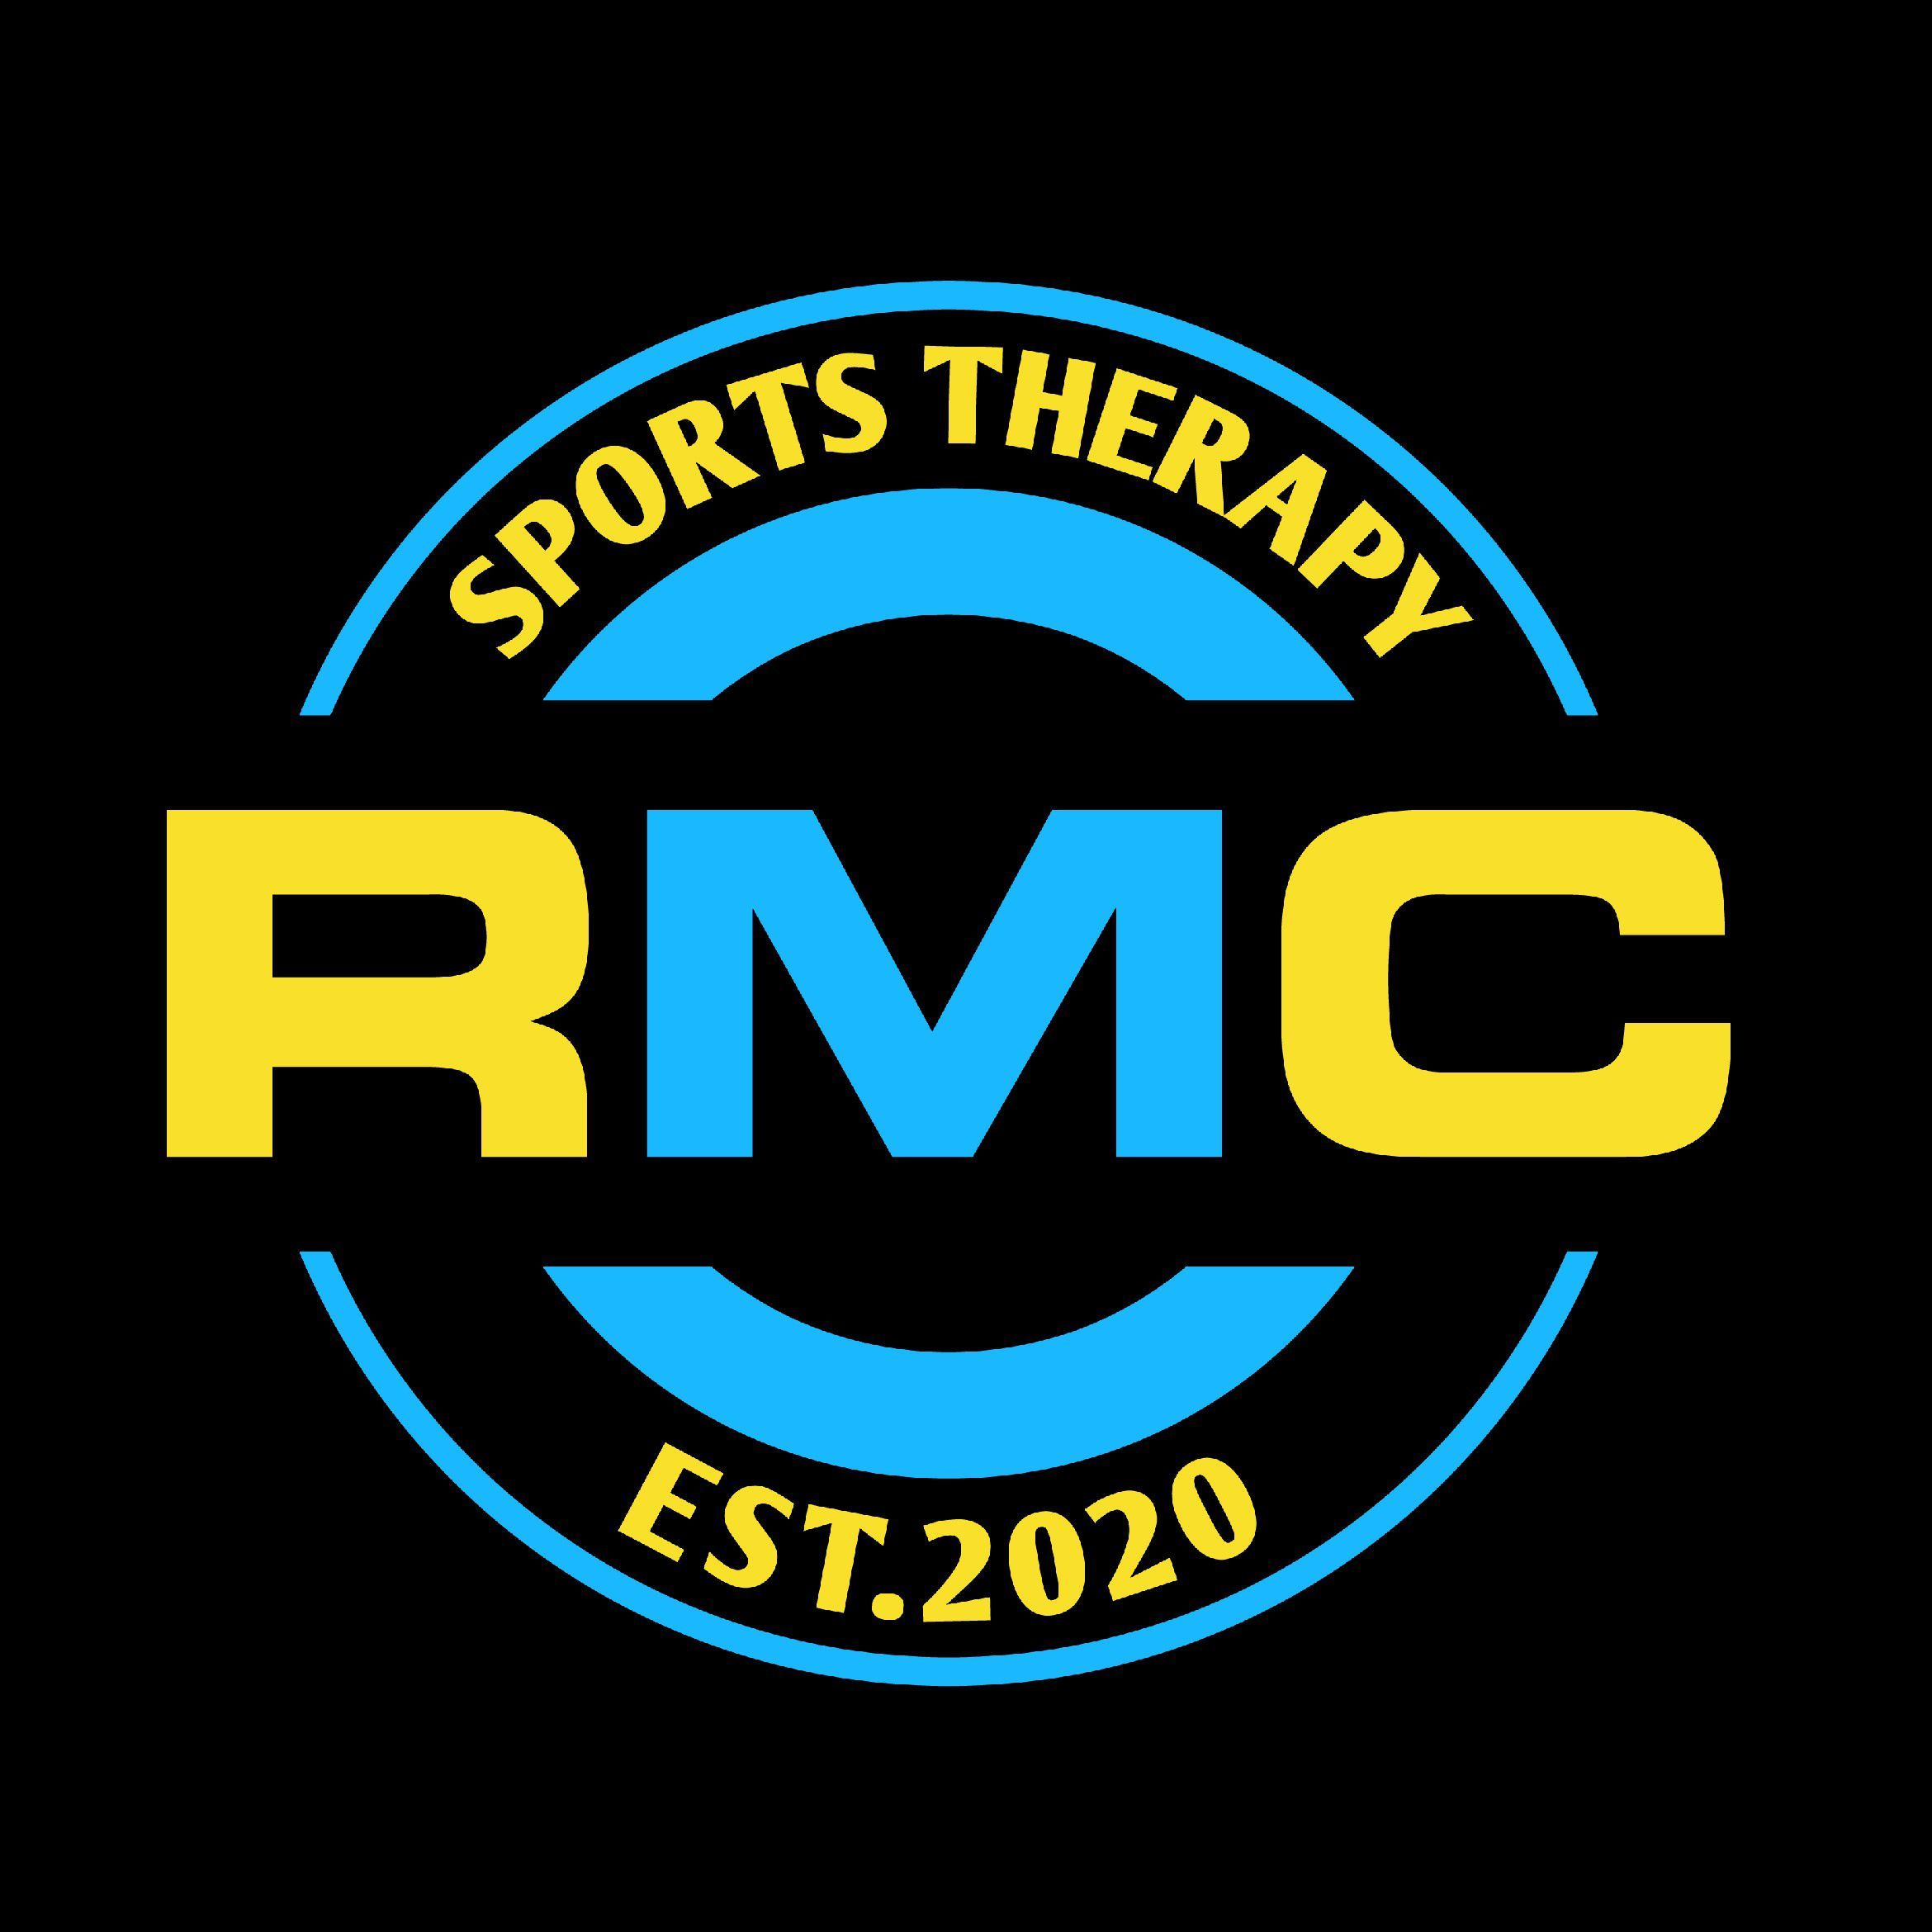 RMC SPORTS THERAPY, 23 Ashbrook Court, Londonderry